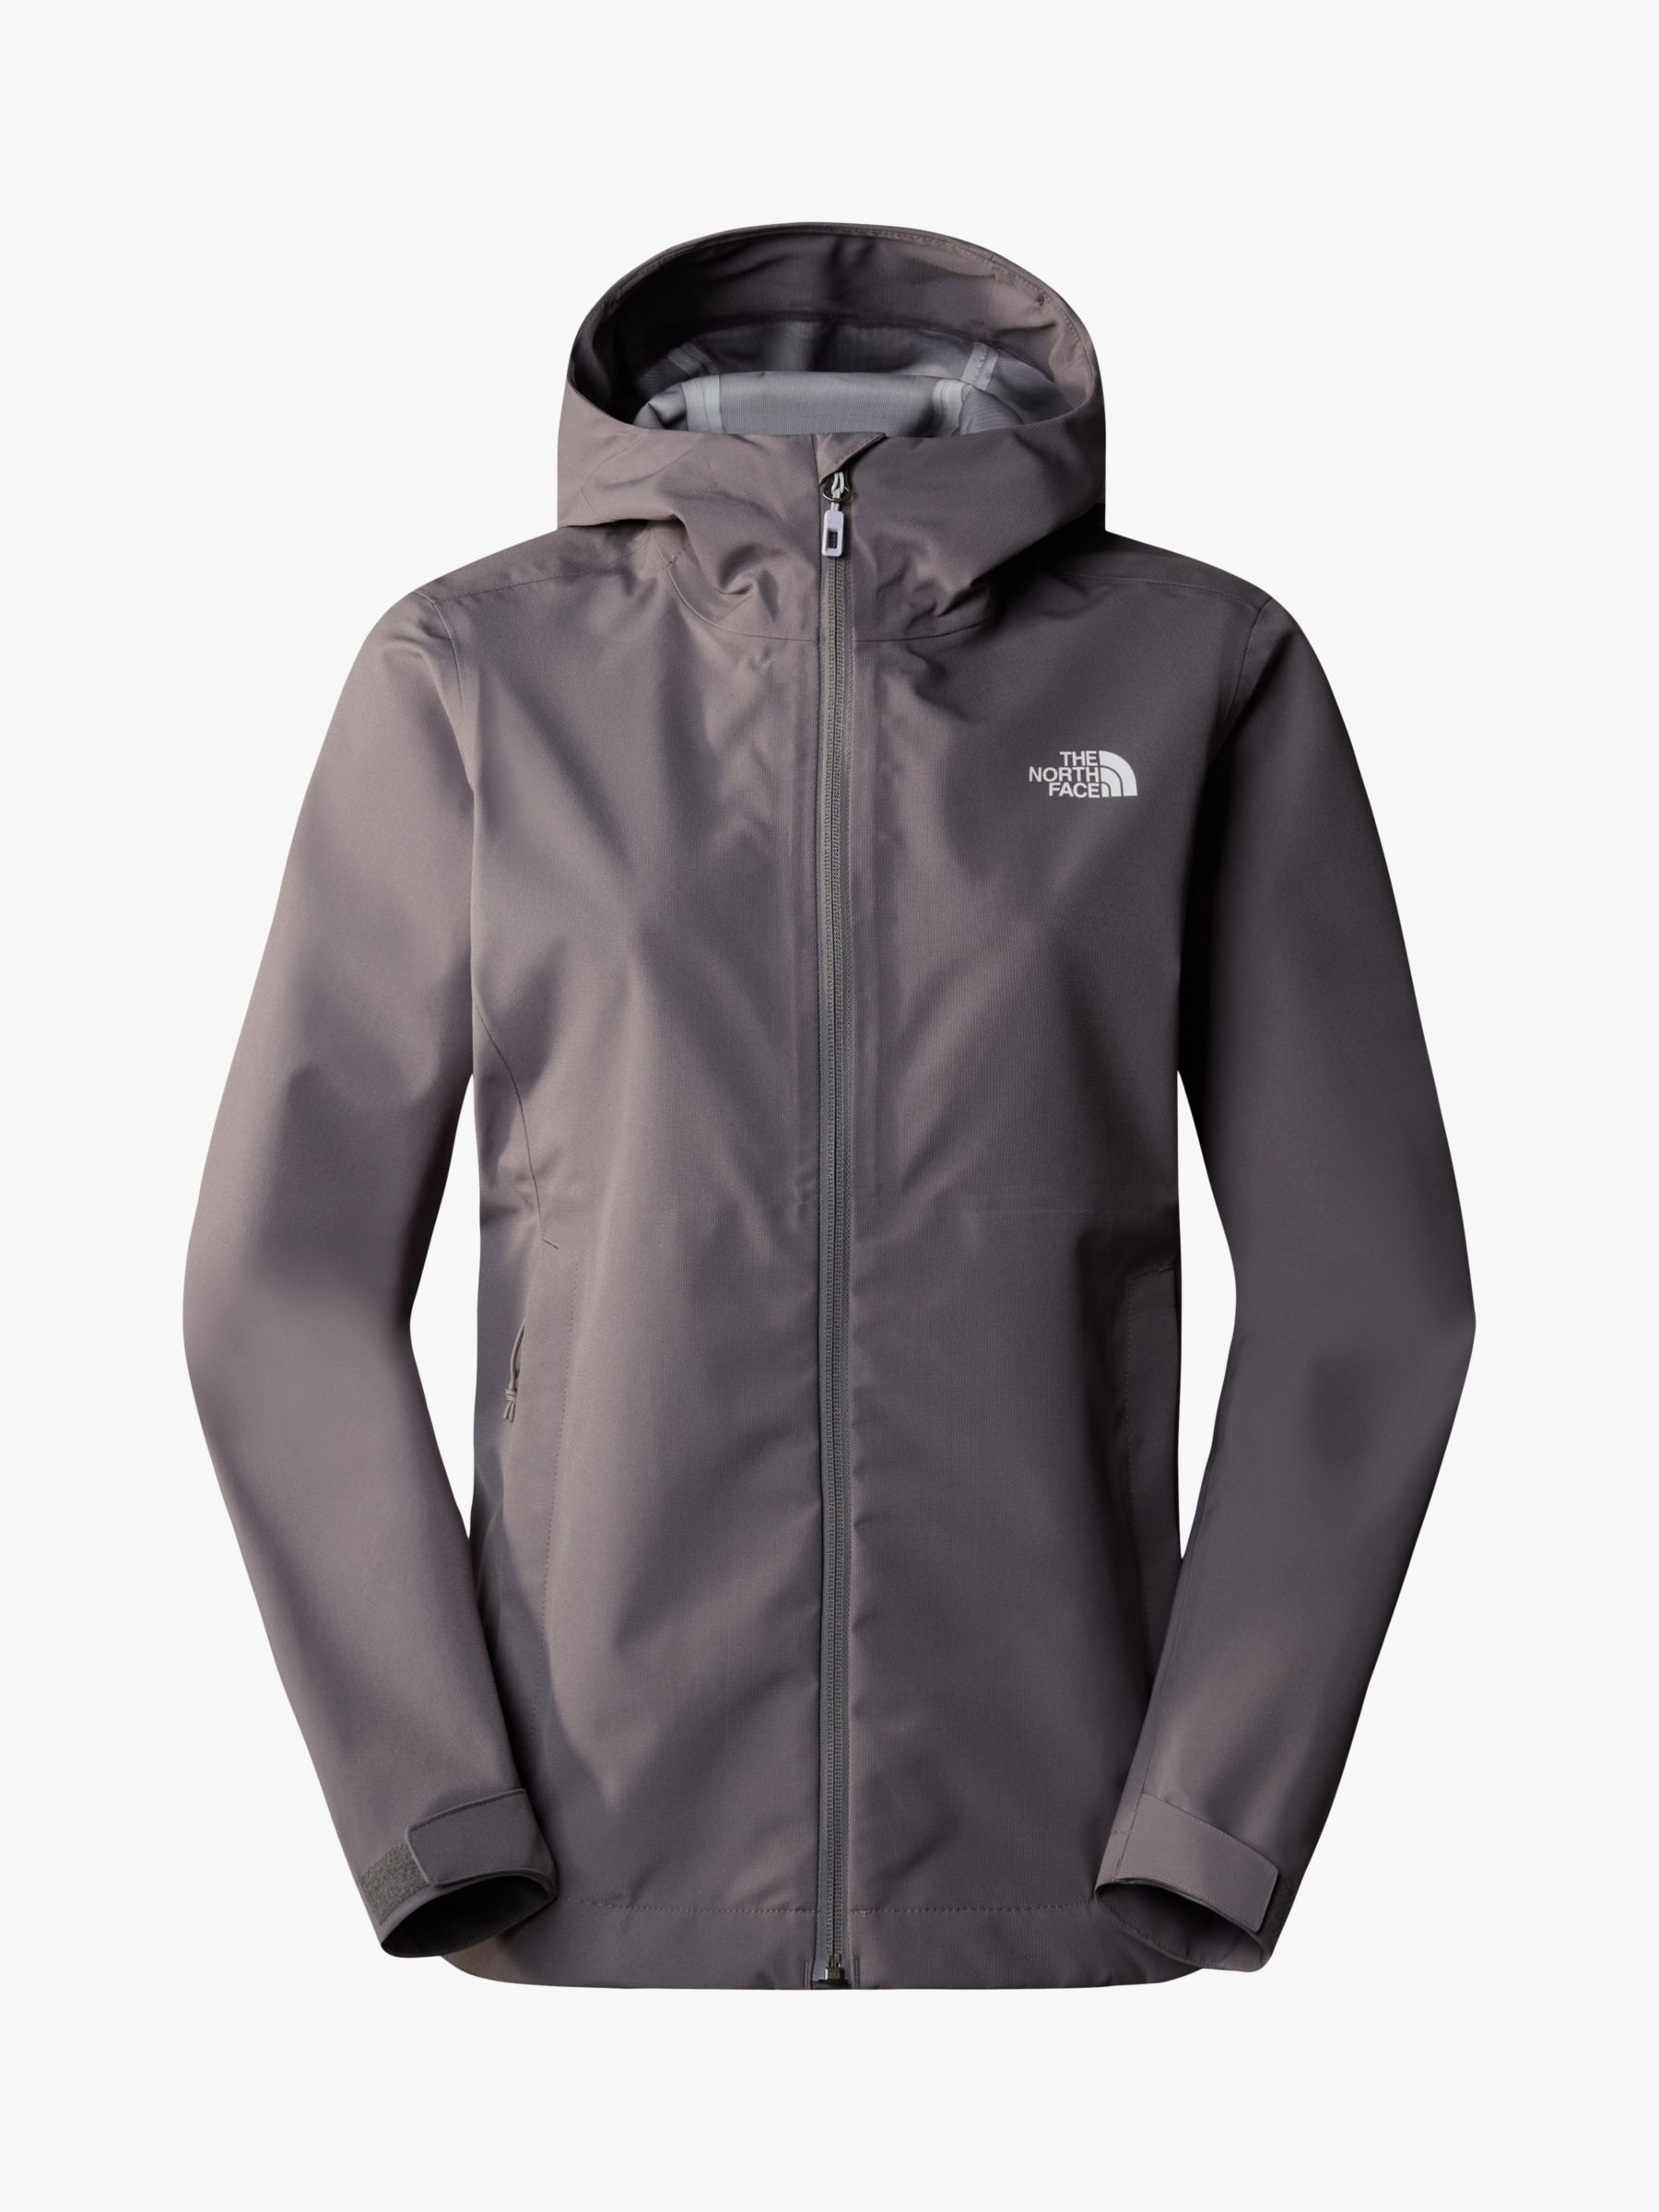 Buy The North Face Women's Whiton 3 Layer Jacket, Smoked Pearl Online at johnlewis.com